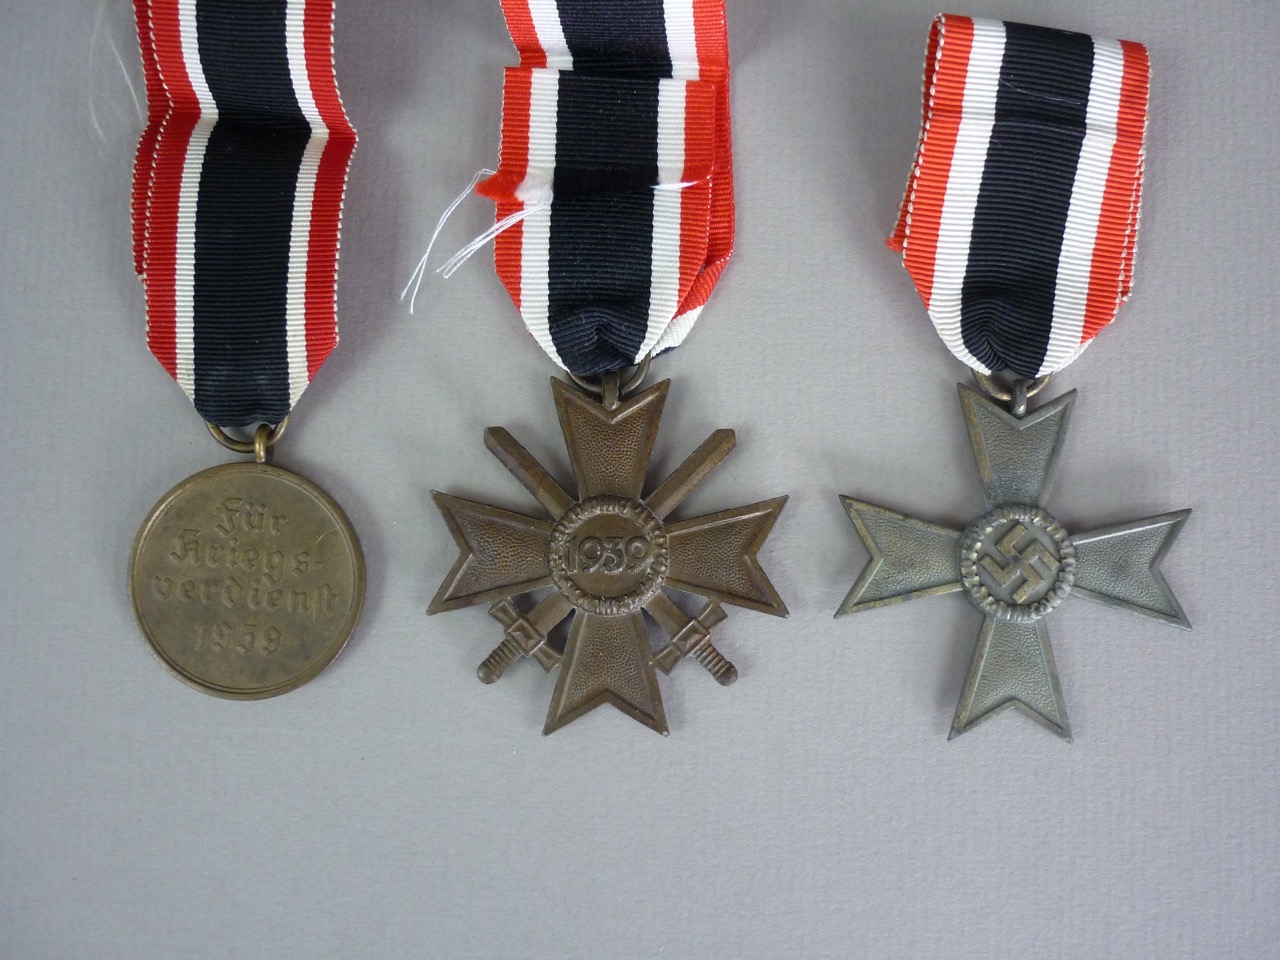 Two German Third Reich War Merit Crosses and a War Merit Medal - Image 2 of 2